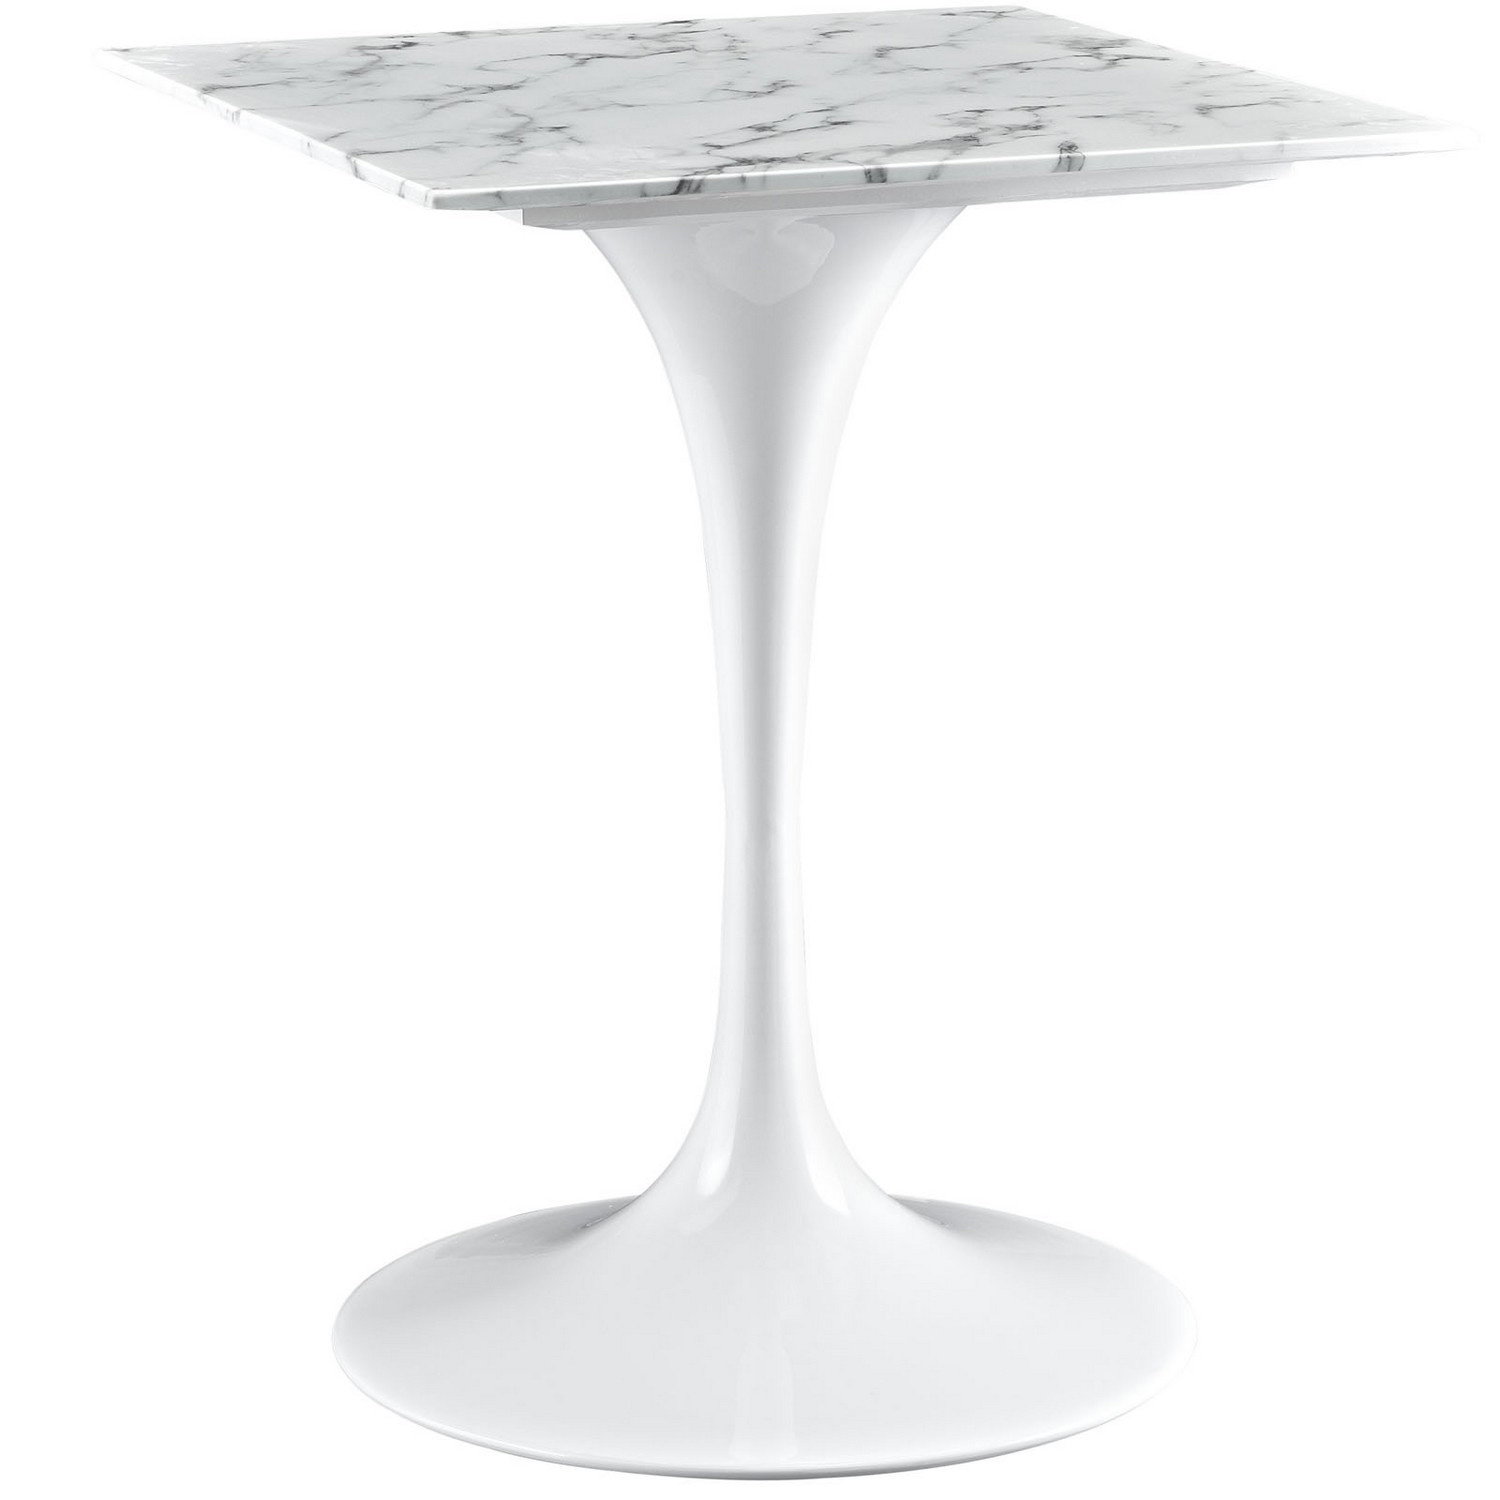 Modway Lippa 24 Marble Top Dining Table - White